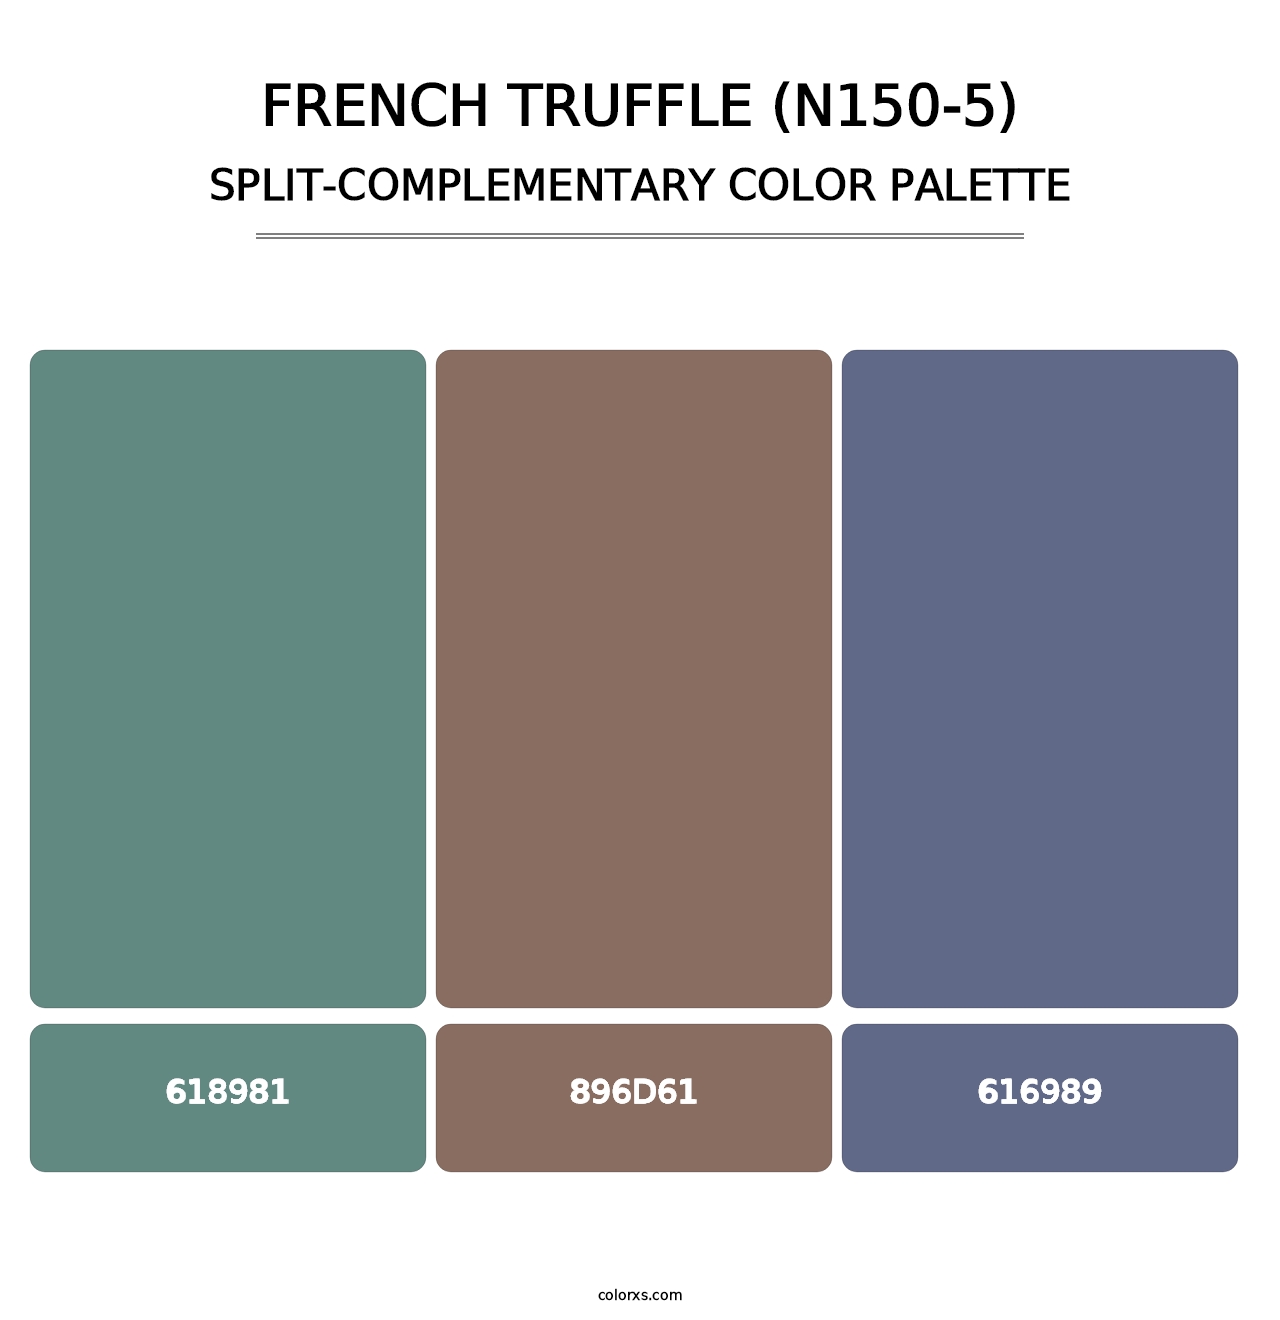 French Truffle (N150-5) - Split-Complementary Color Palette